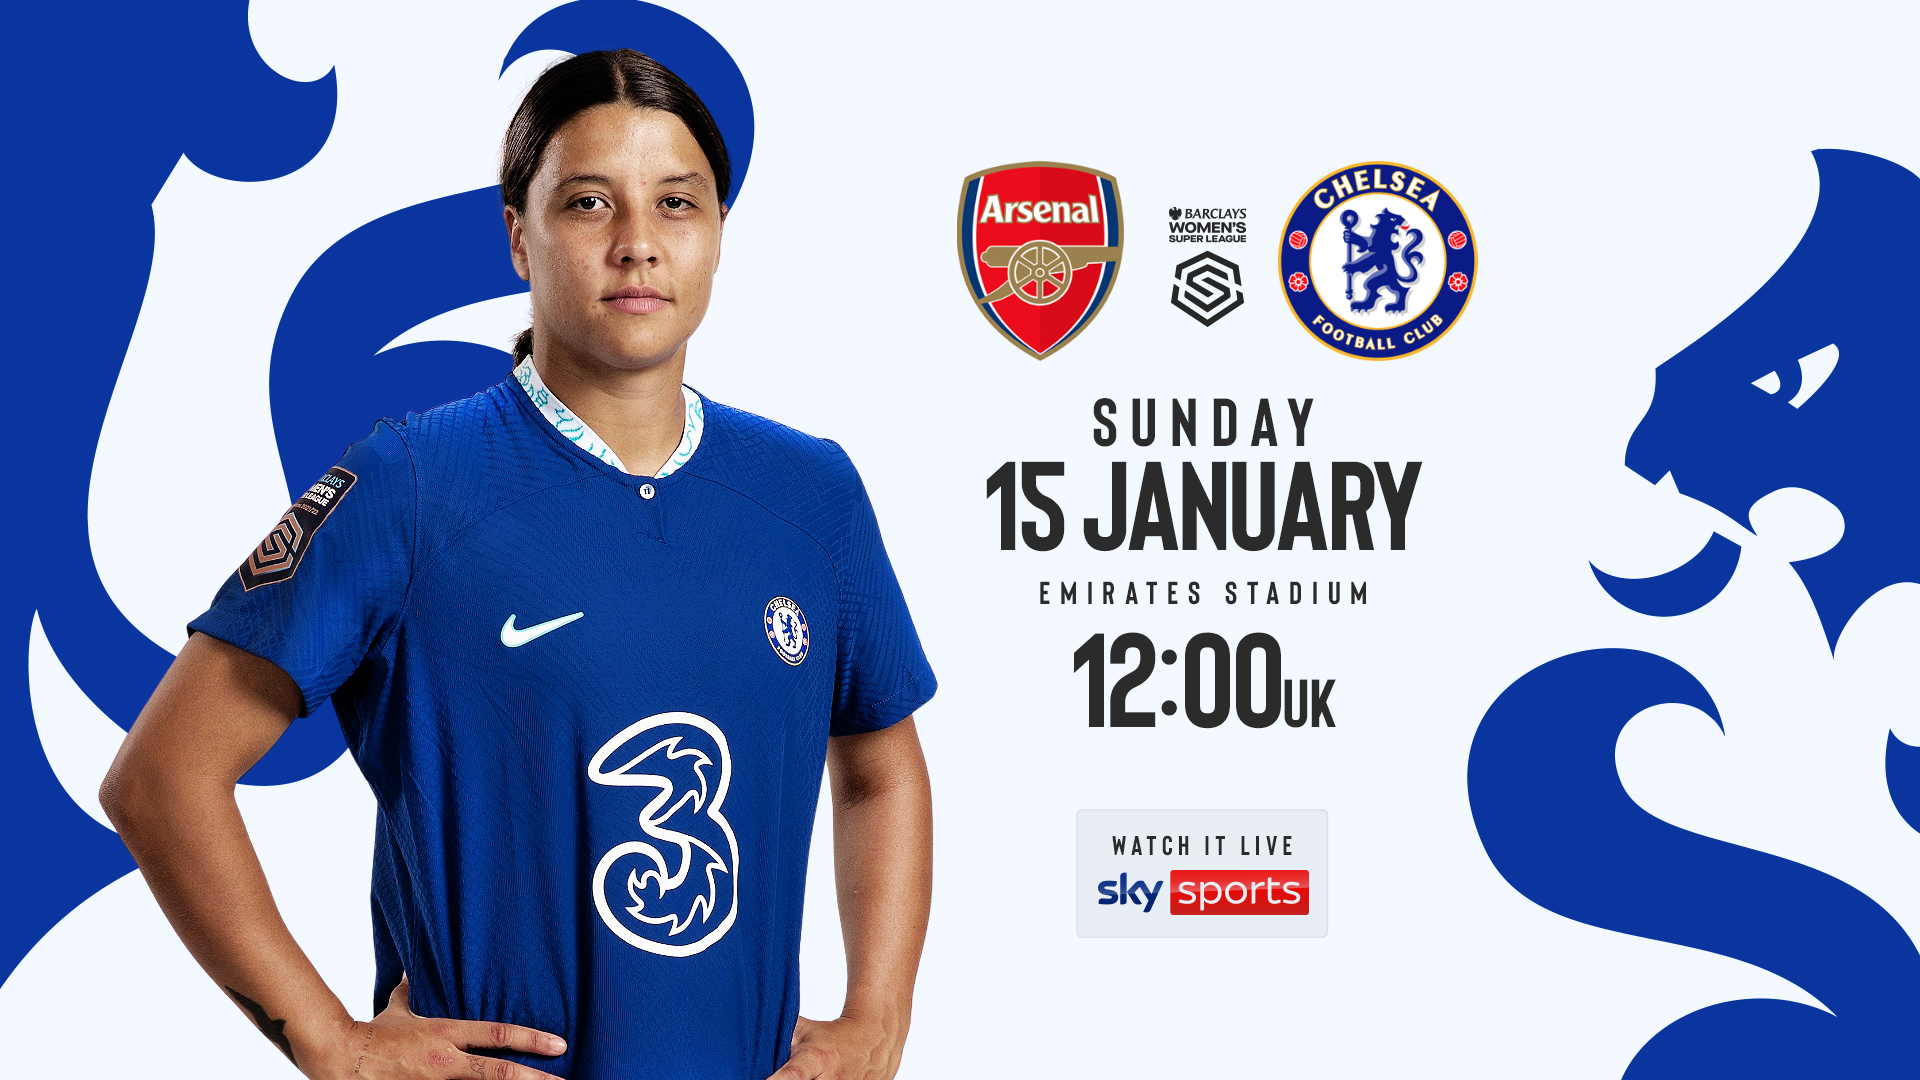 Arsenal v Chelsea Women | Baffled Piers Morgan cannot believe Mudryk is going to Chelsea | The Paradise